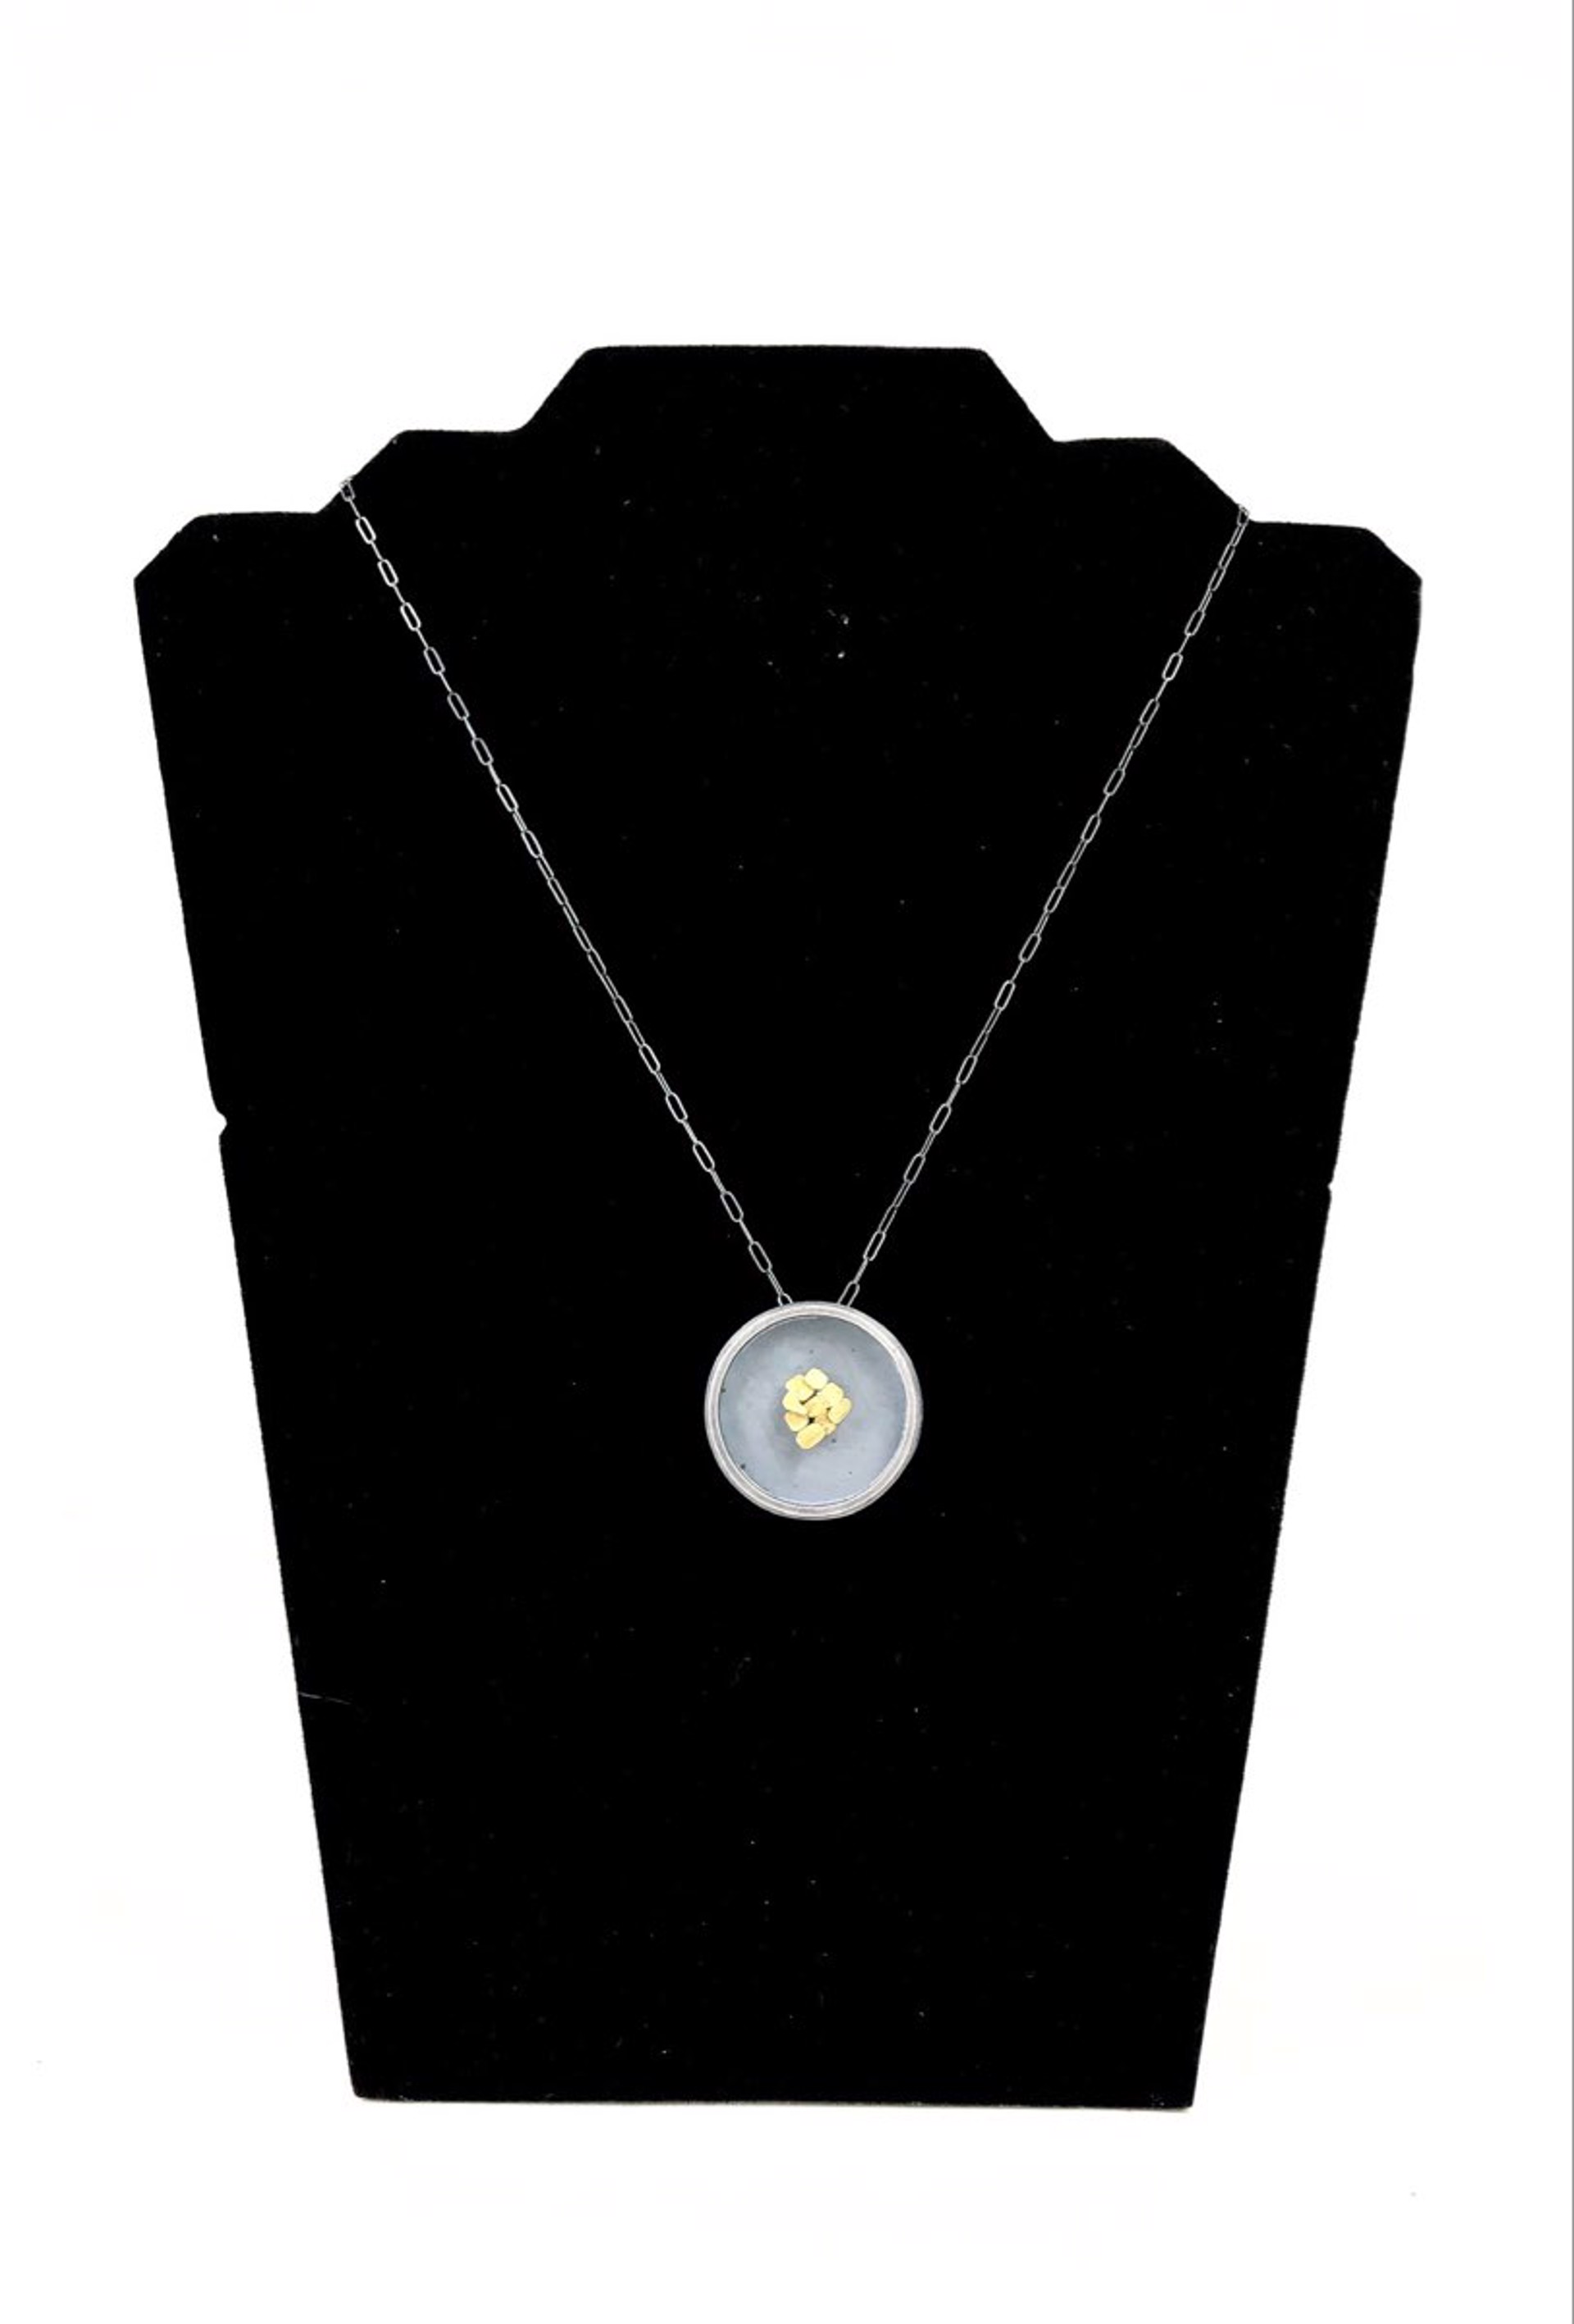 Mond Bi-metal Squares Cluster Pendant with Silver Chain by Theresa St. Romain